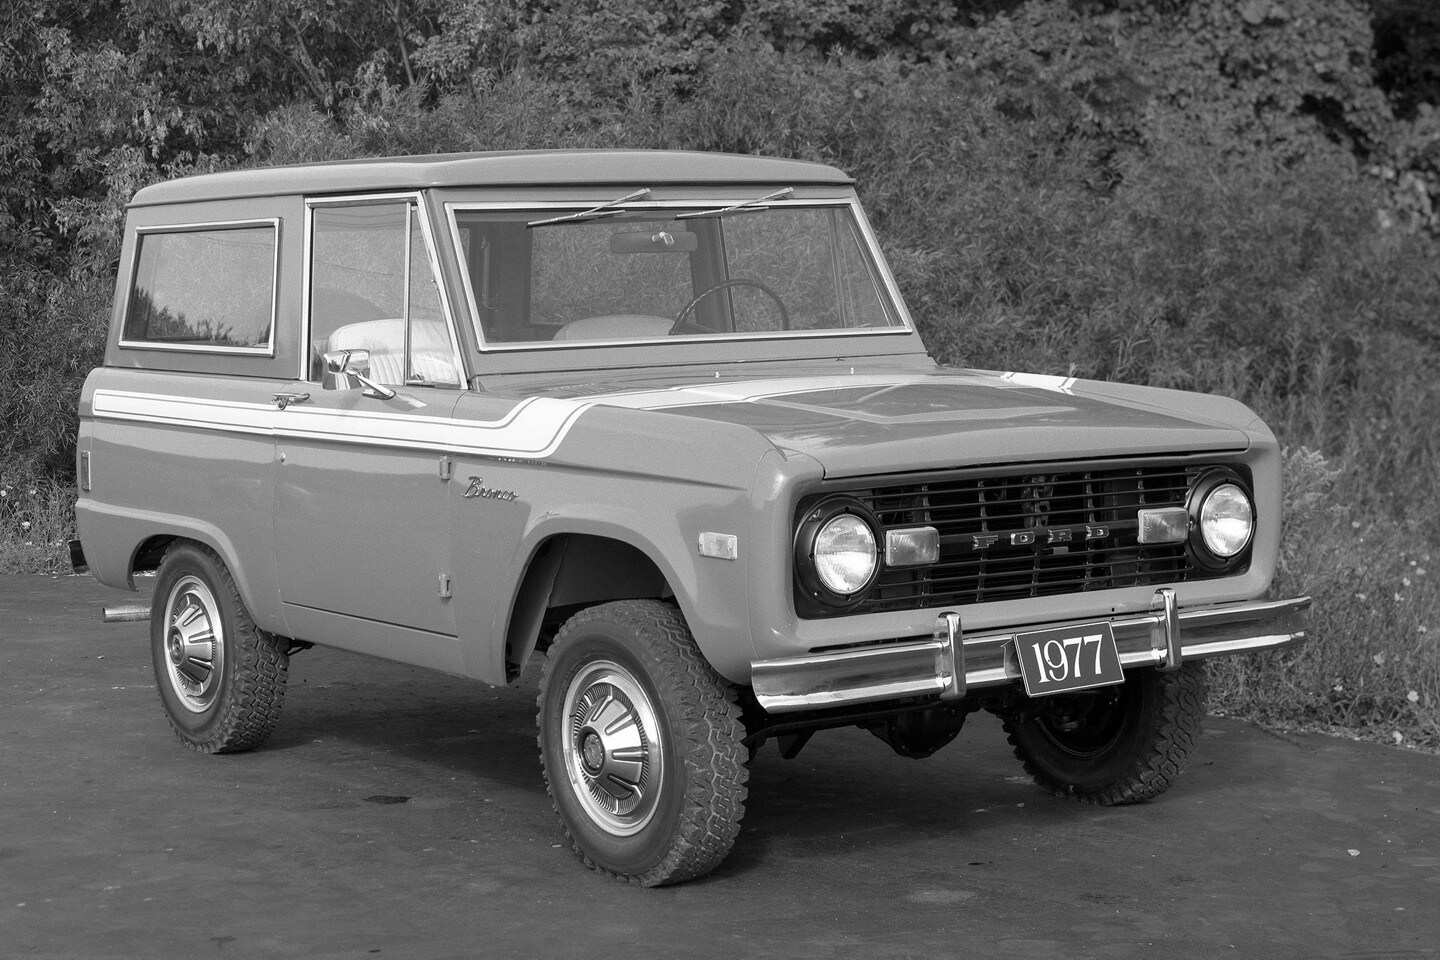 1977 Ford Bronco with special decor package